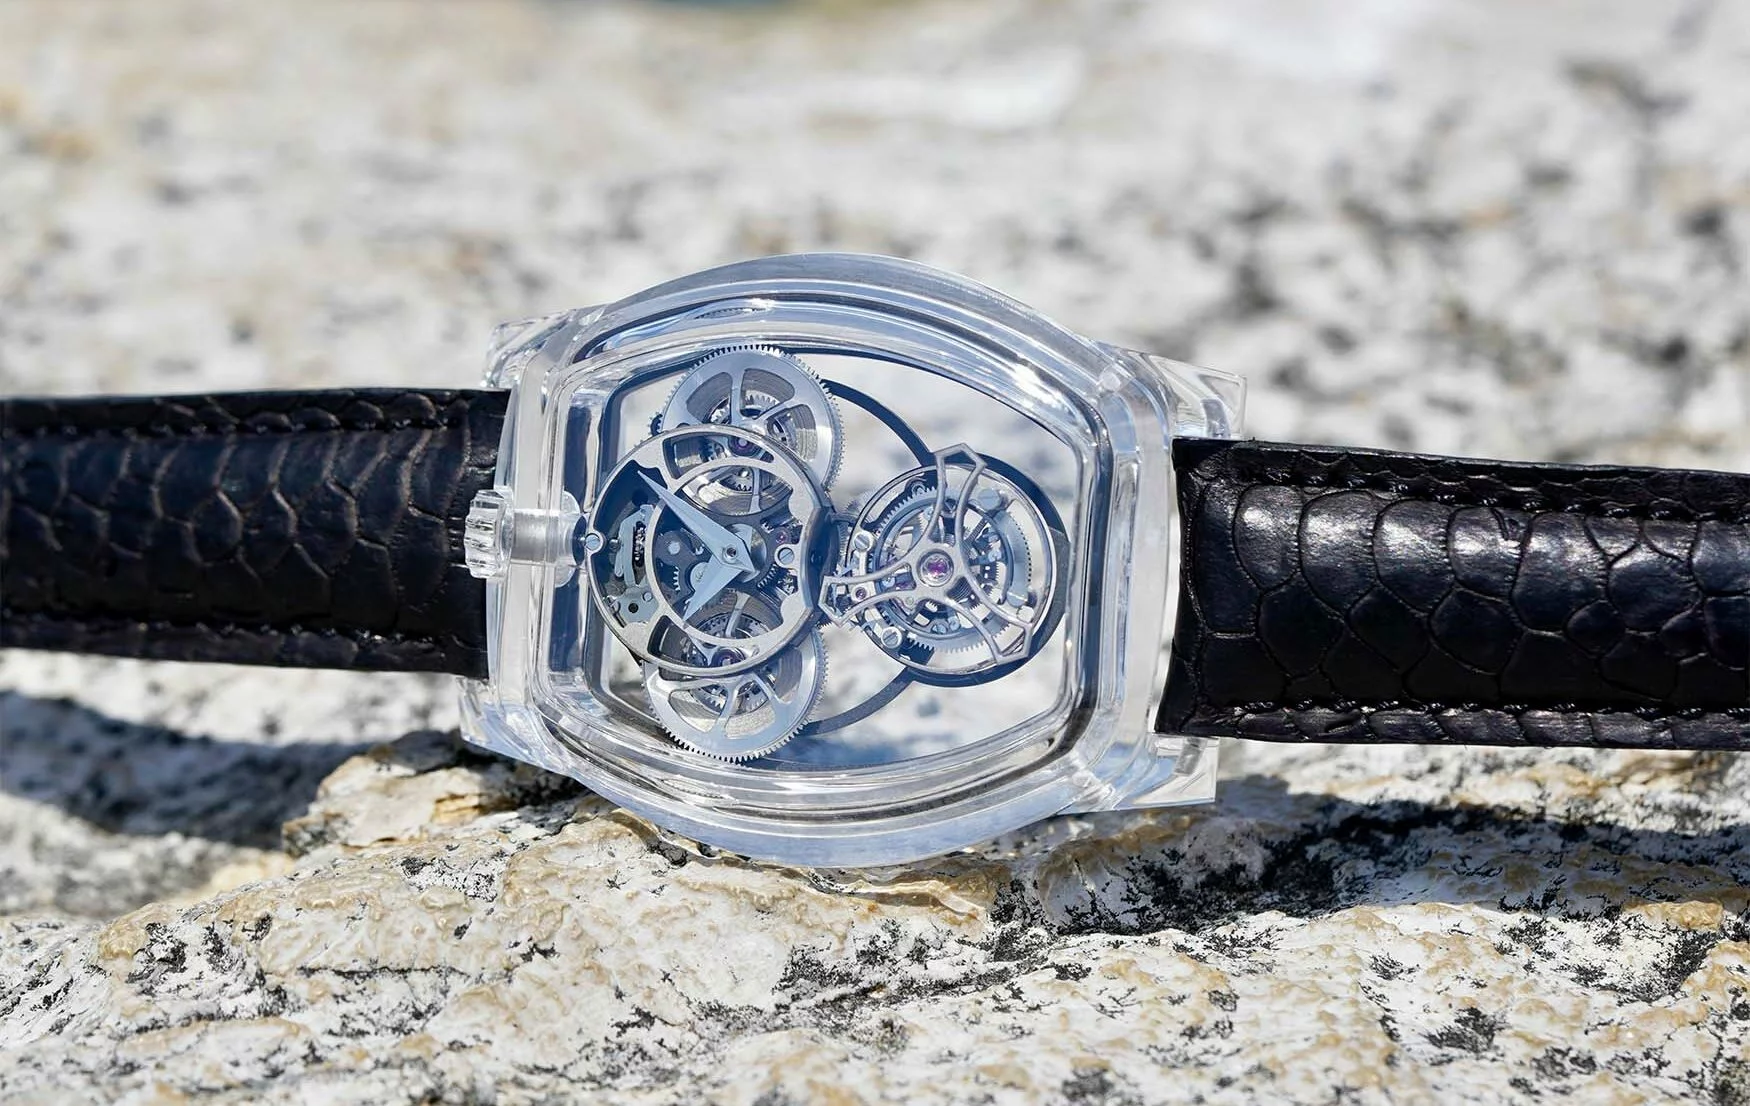 Yvan Arpa on LinkedIn: ArtyA Full Moissanite Case First Worldwide for Only  Watch